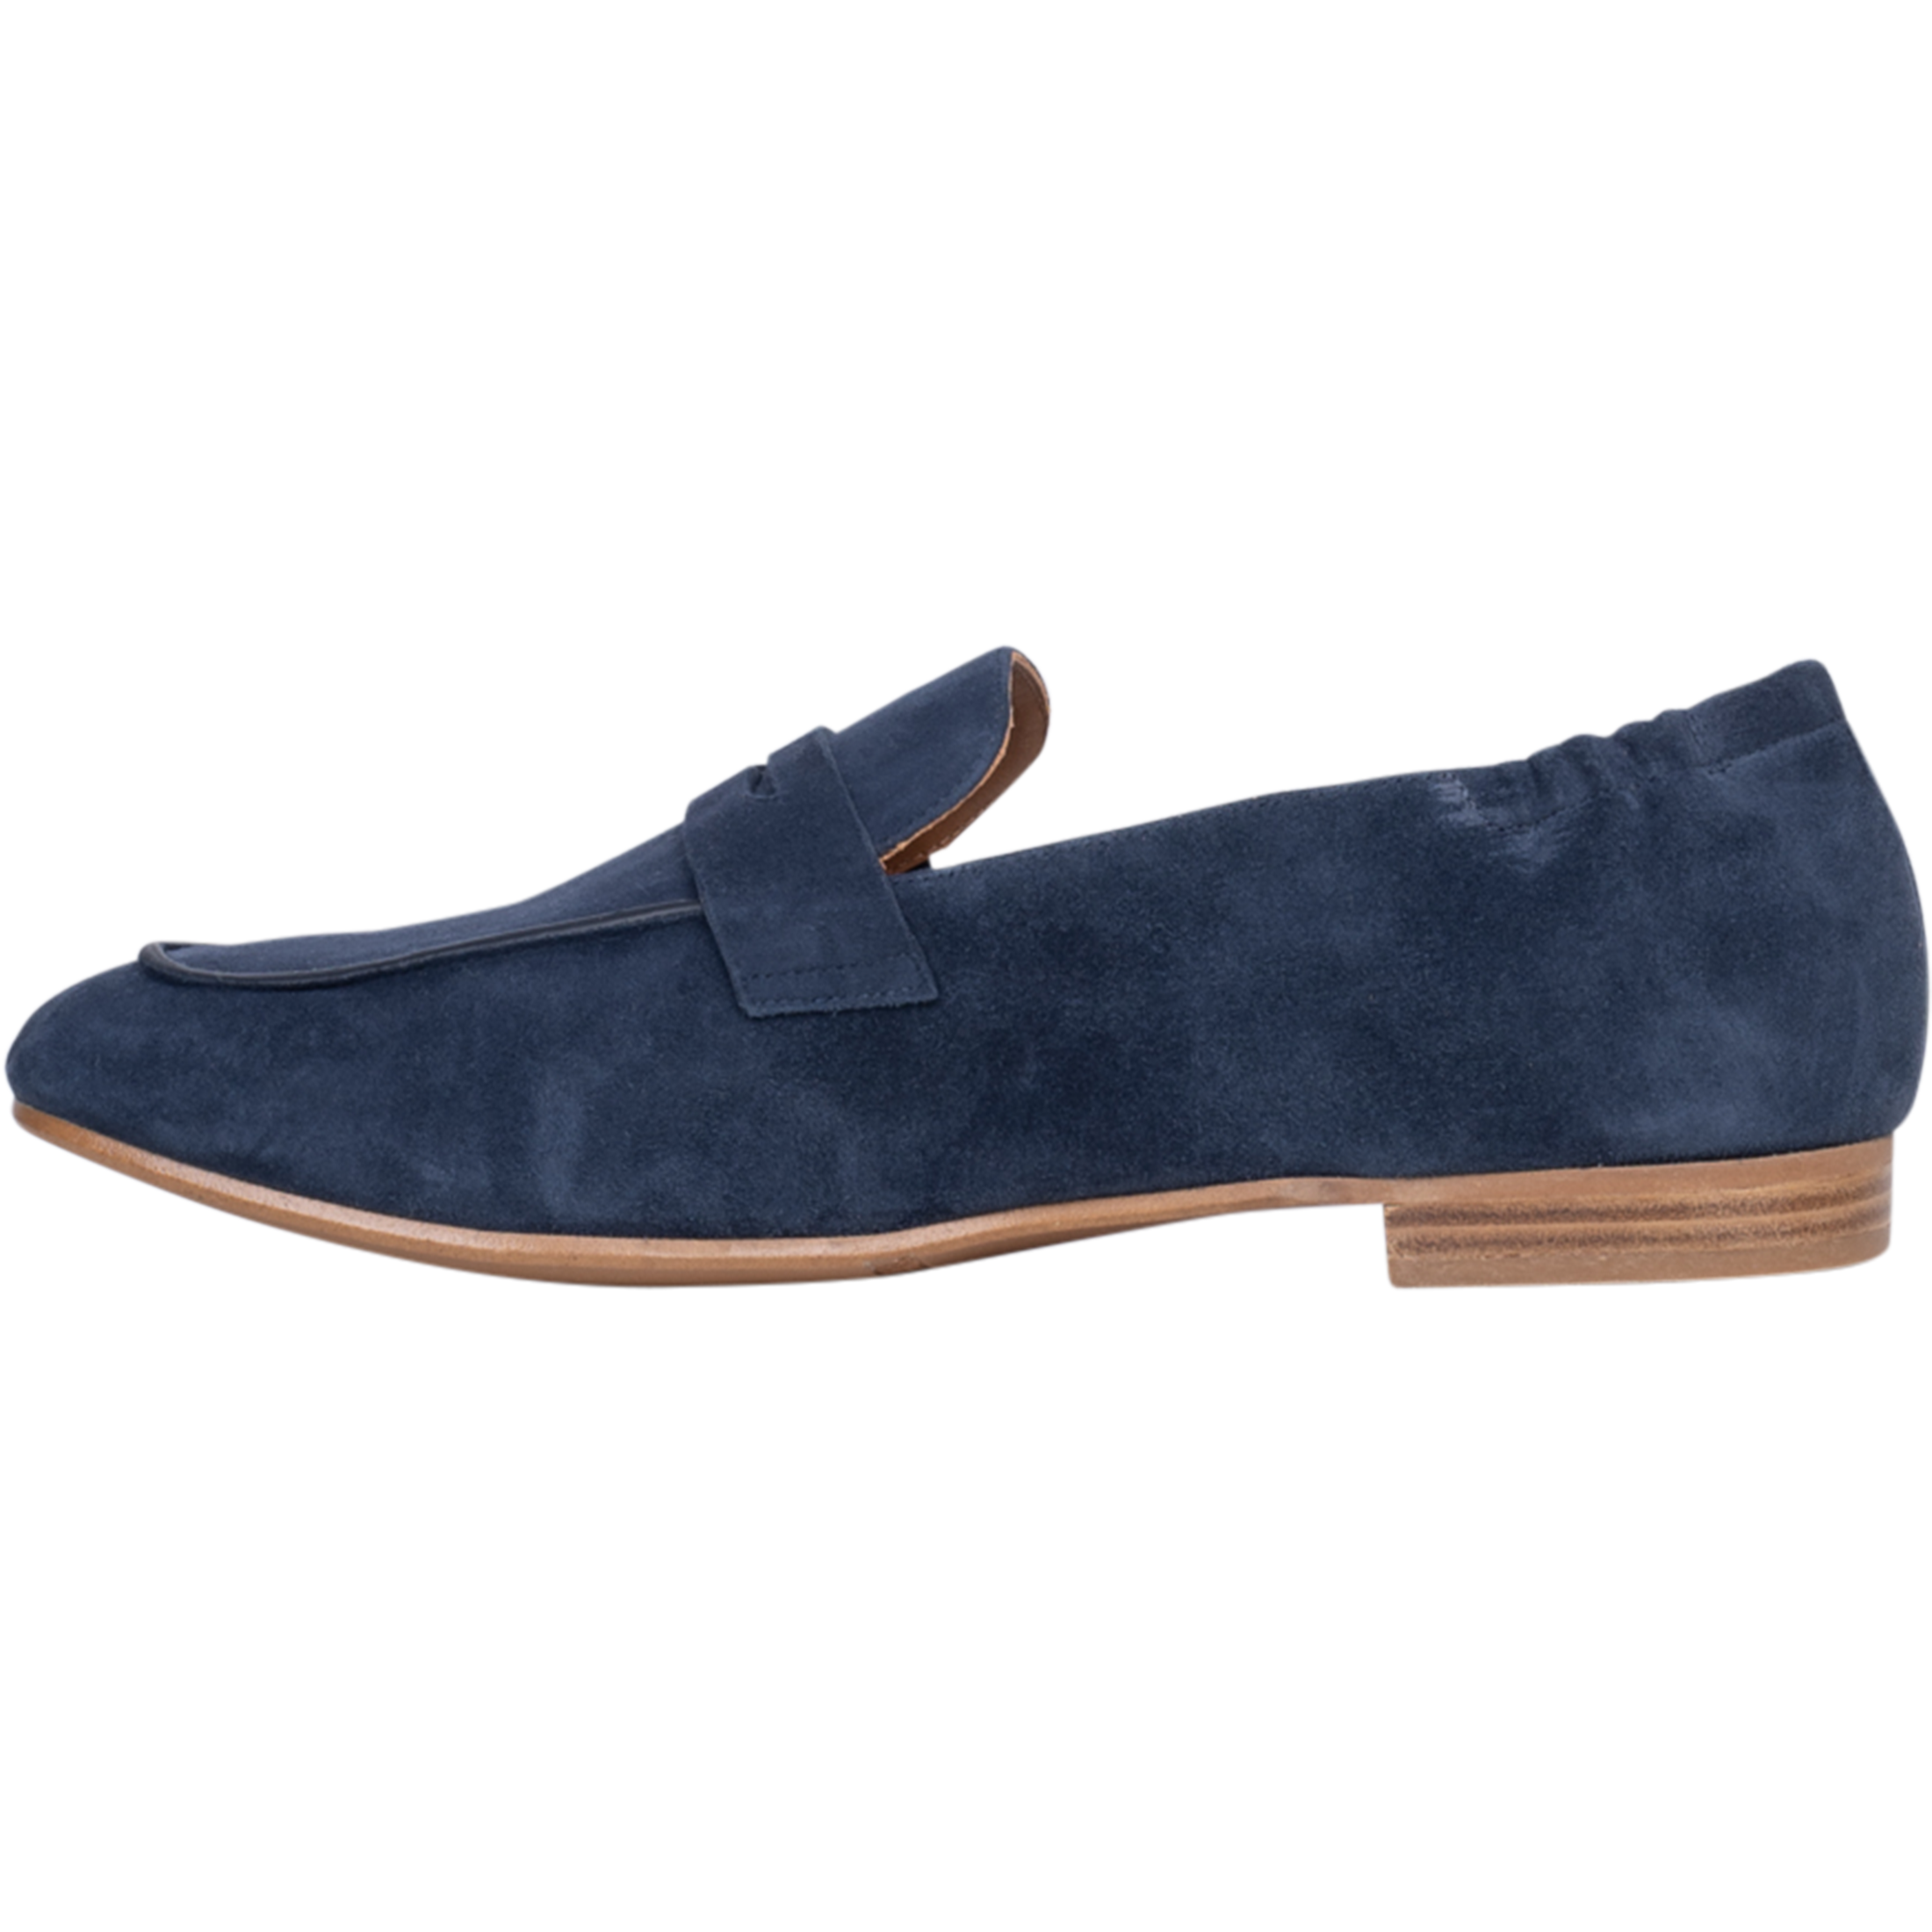 A11919 - Navy Suede/Light Sole